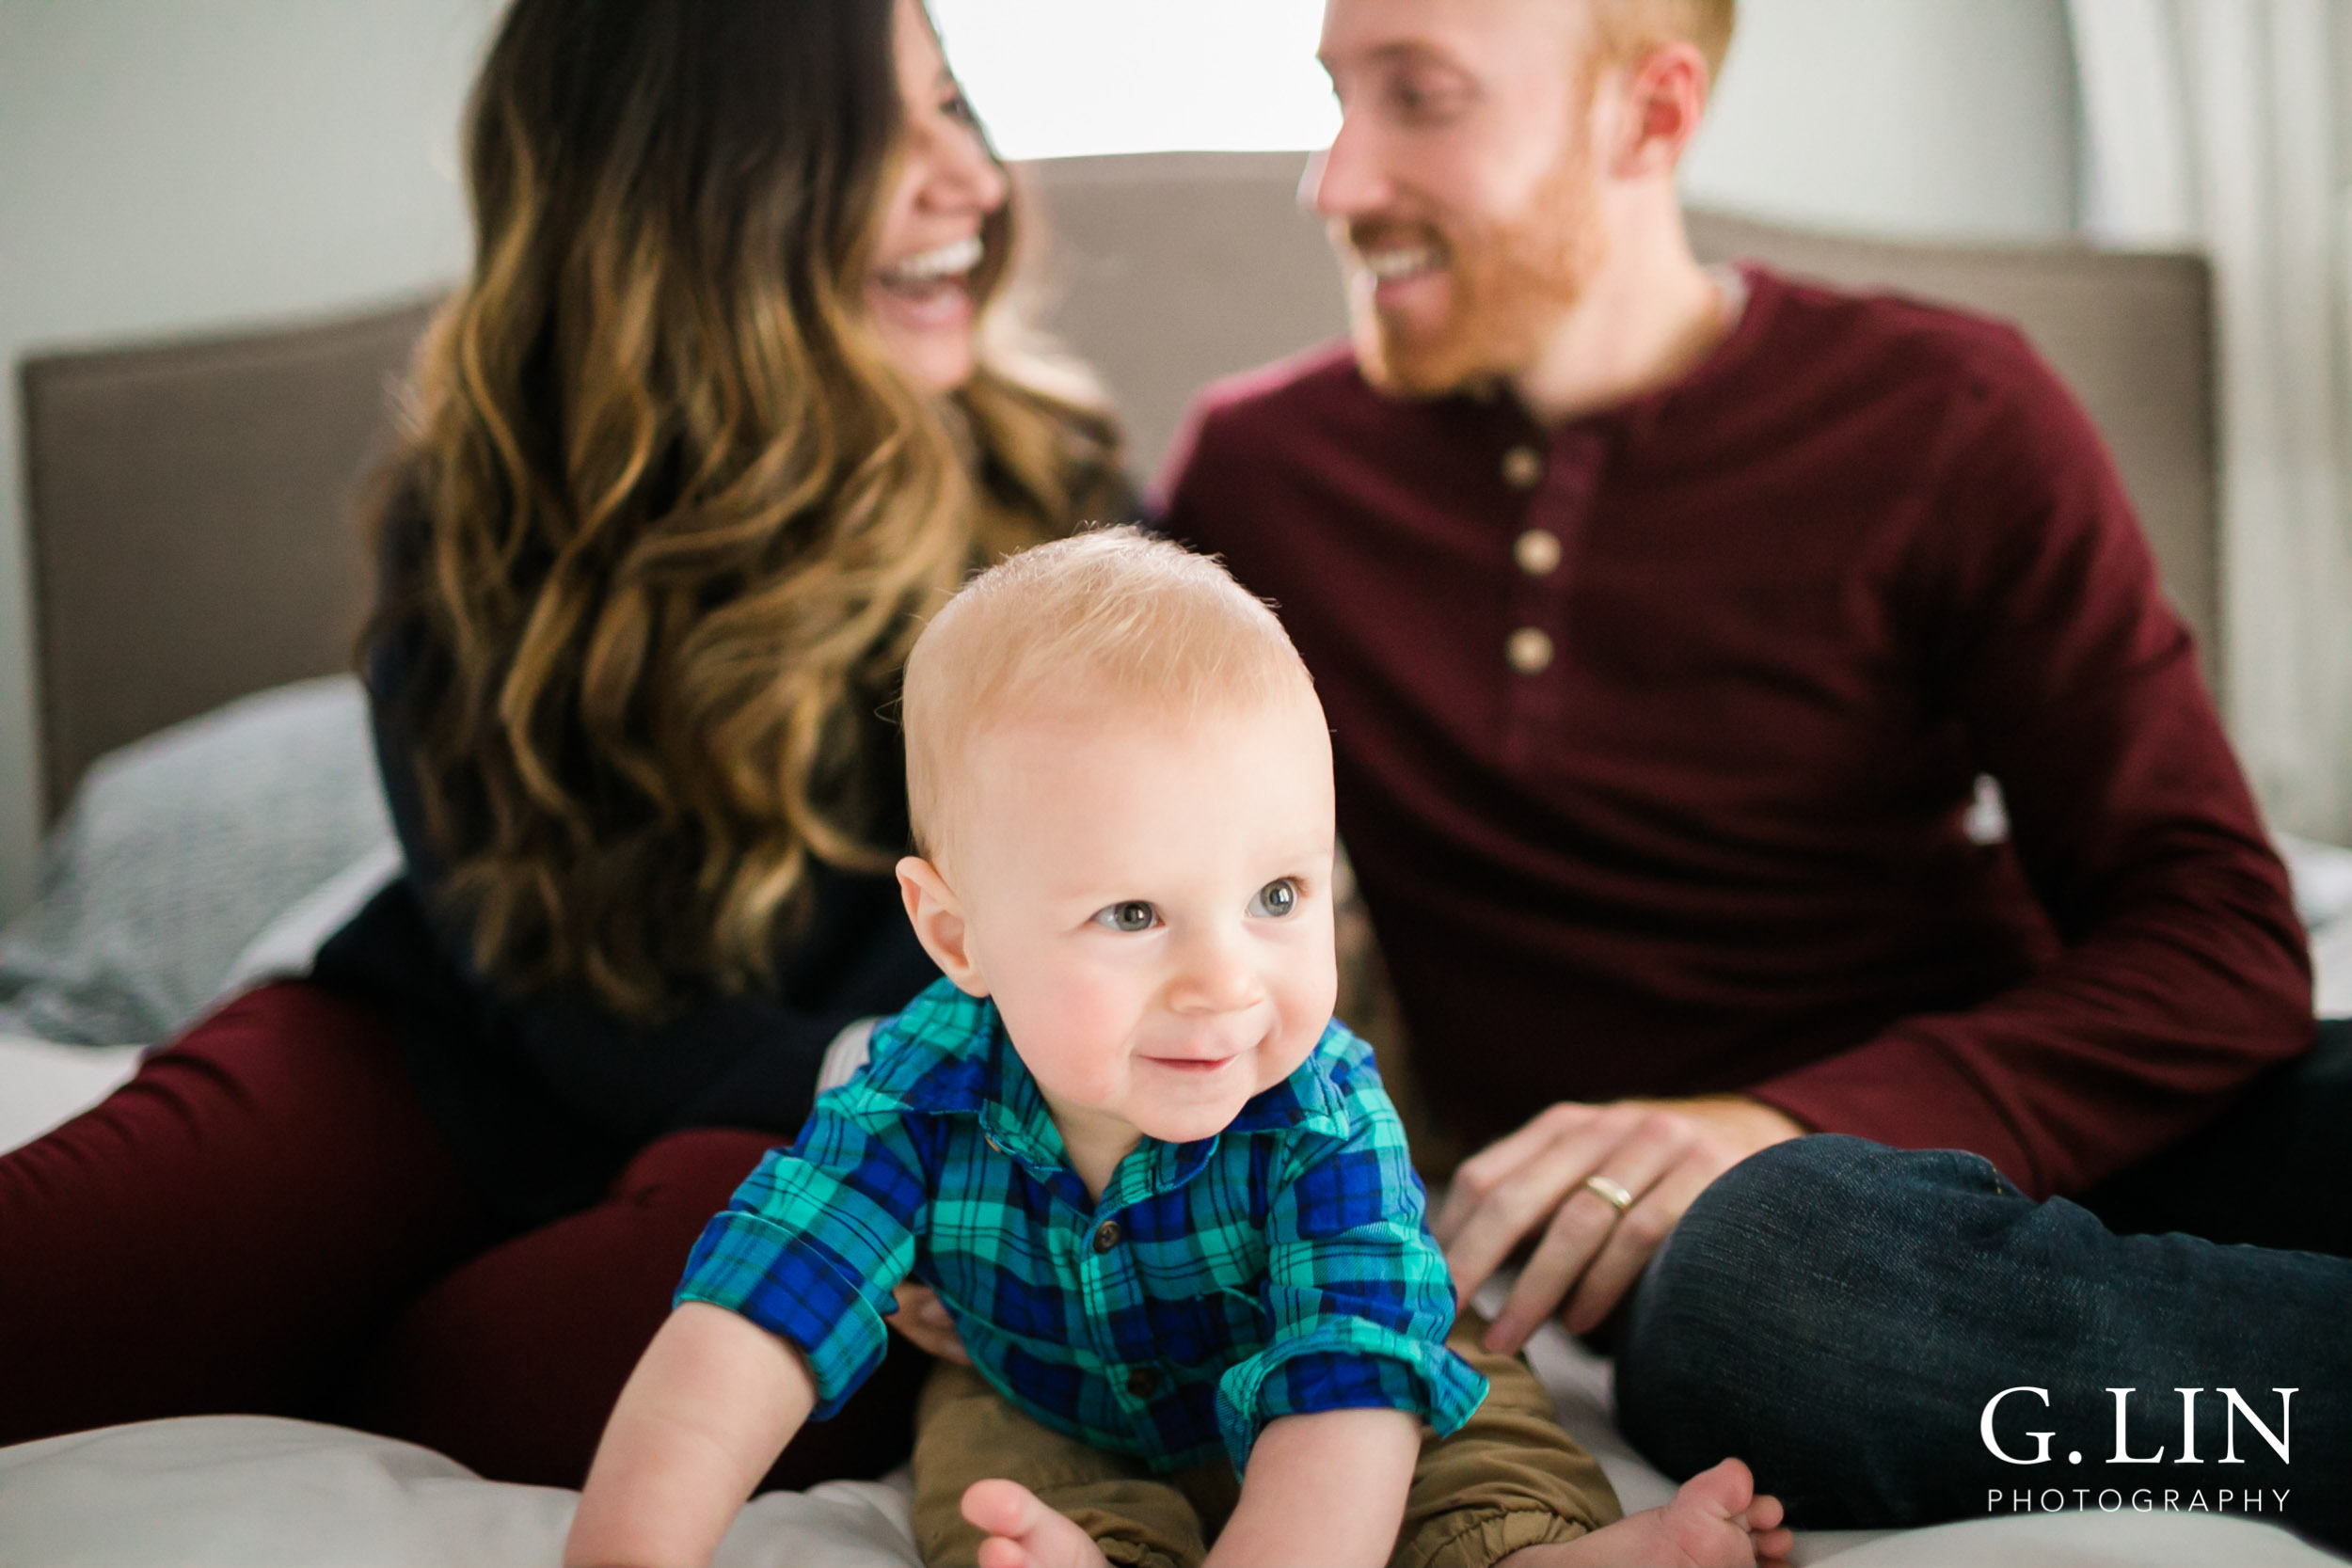 Durham Family Photographer | G. Lin Photography | Curious baby sitting on bed with parents